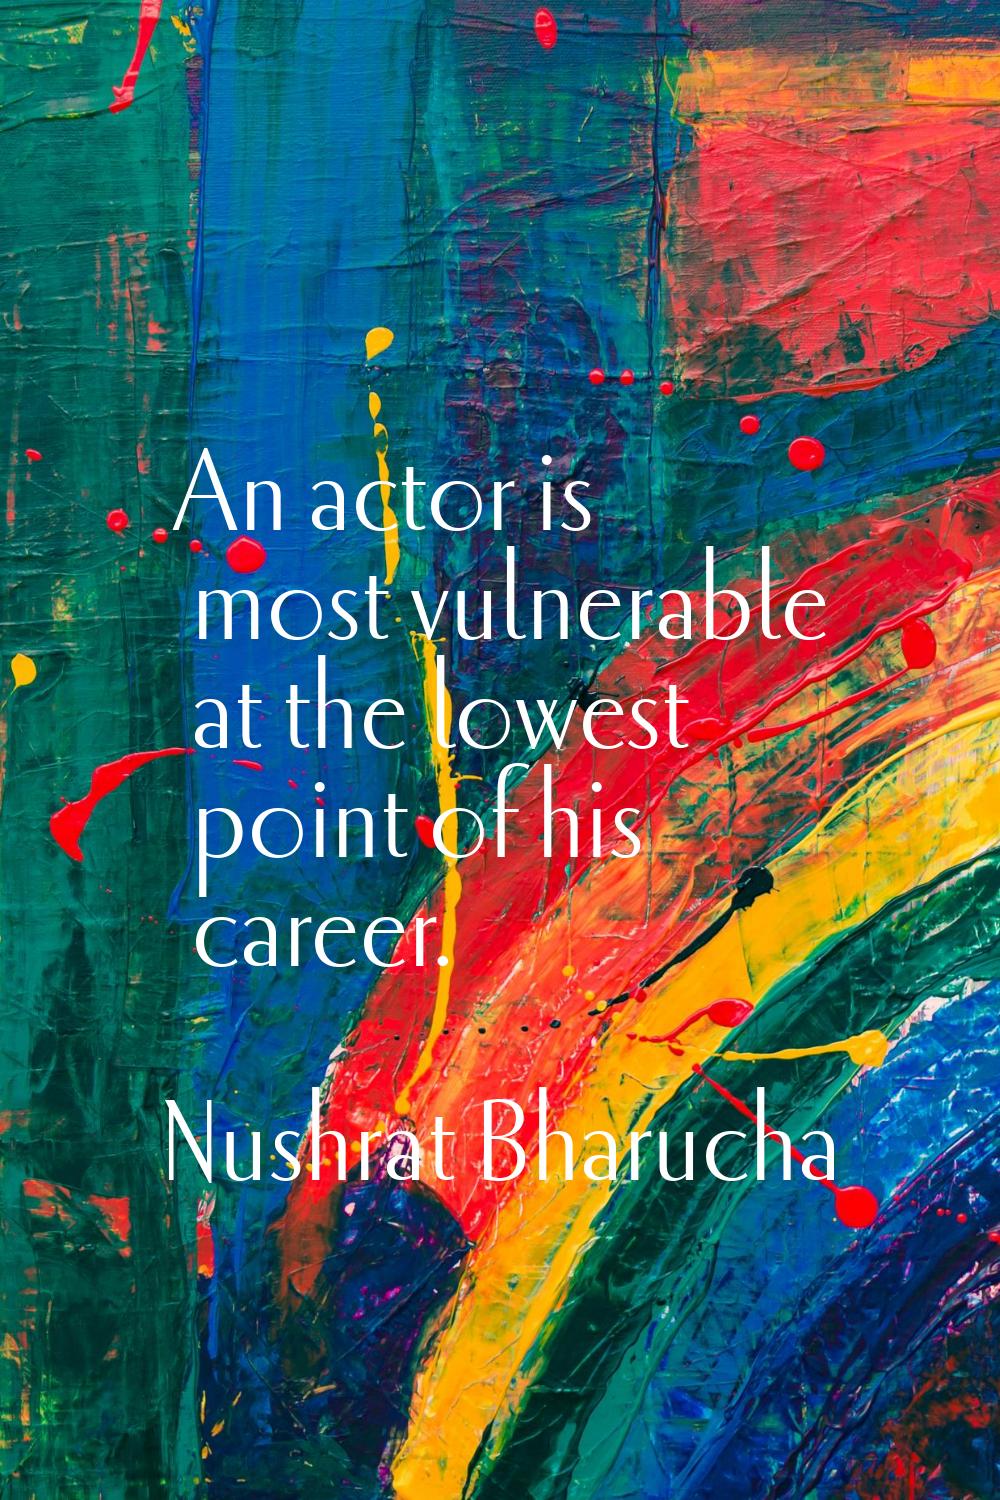 An actor is most vulnerable at the lowest point of his career.